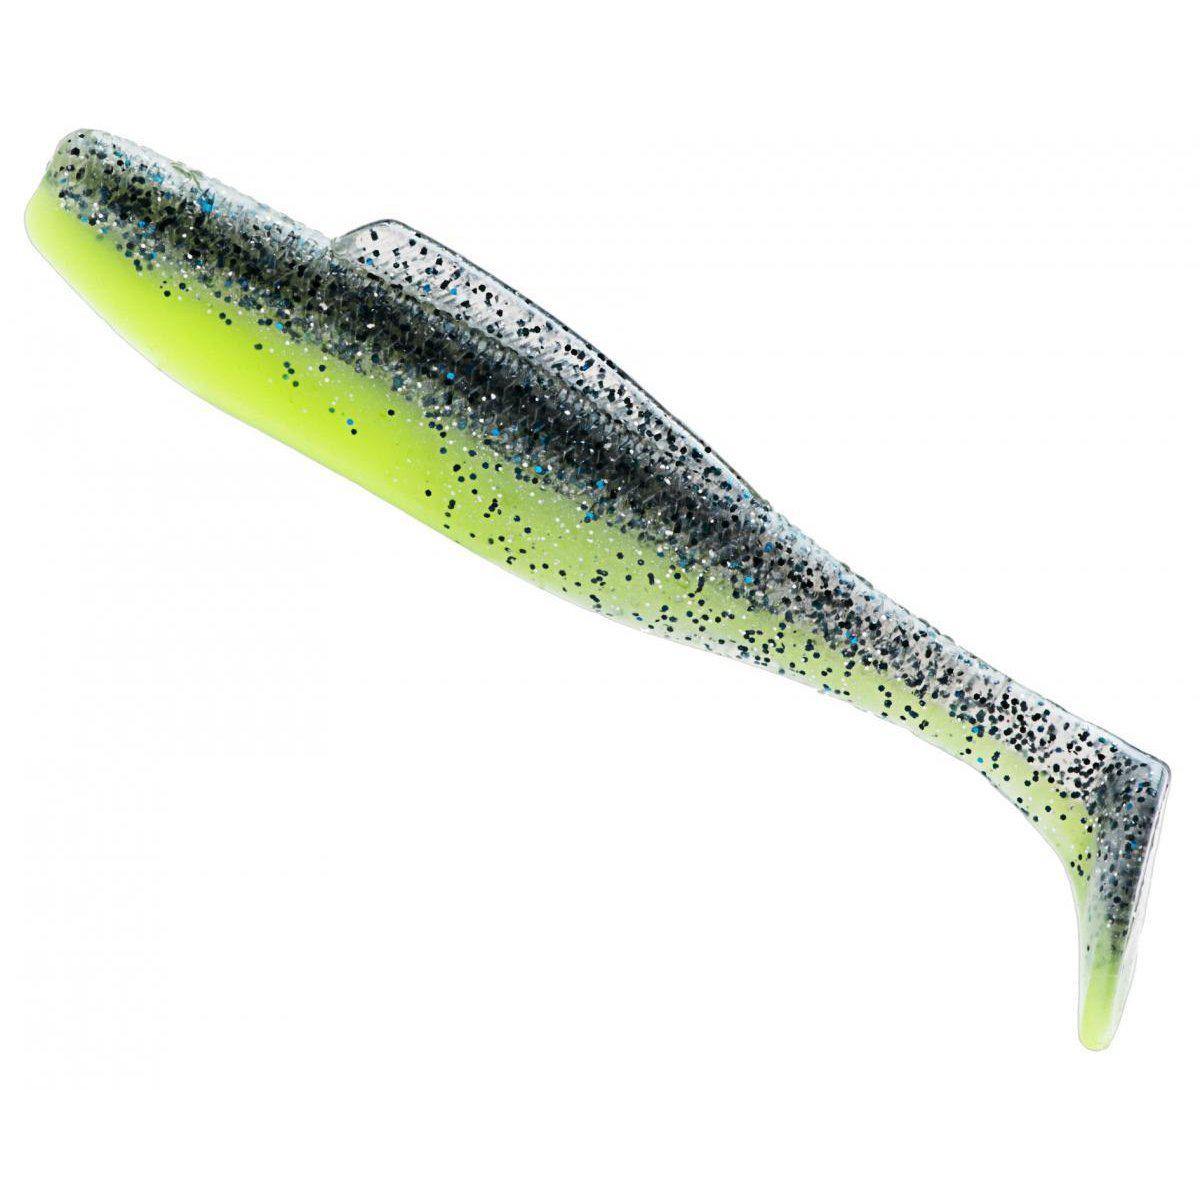 Zman 4 Inch SwimmerZ Soft Plastic Lures - 4 Pack of Z Man Soft